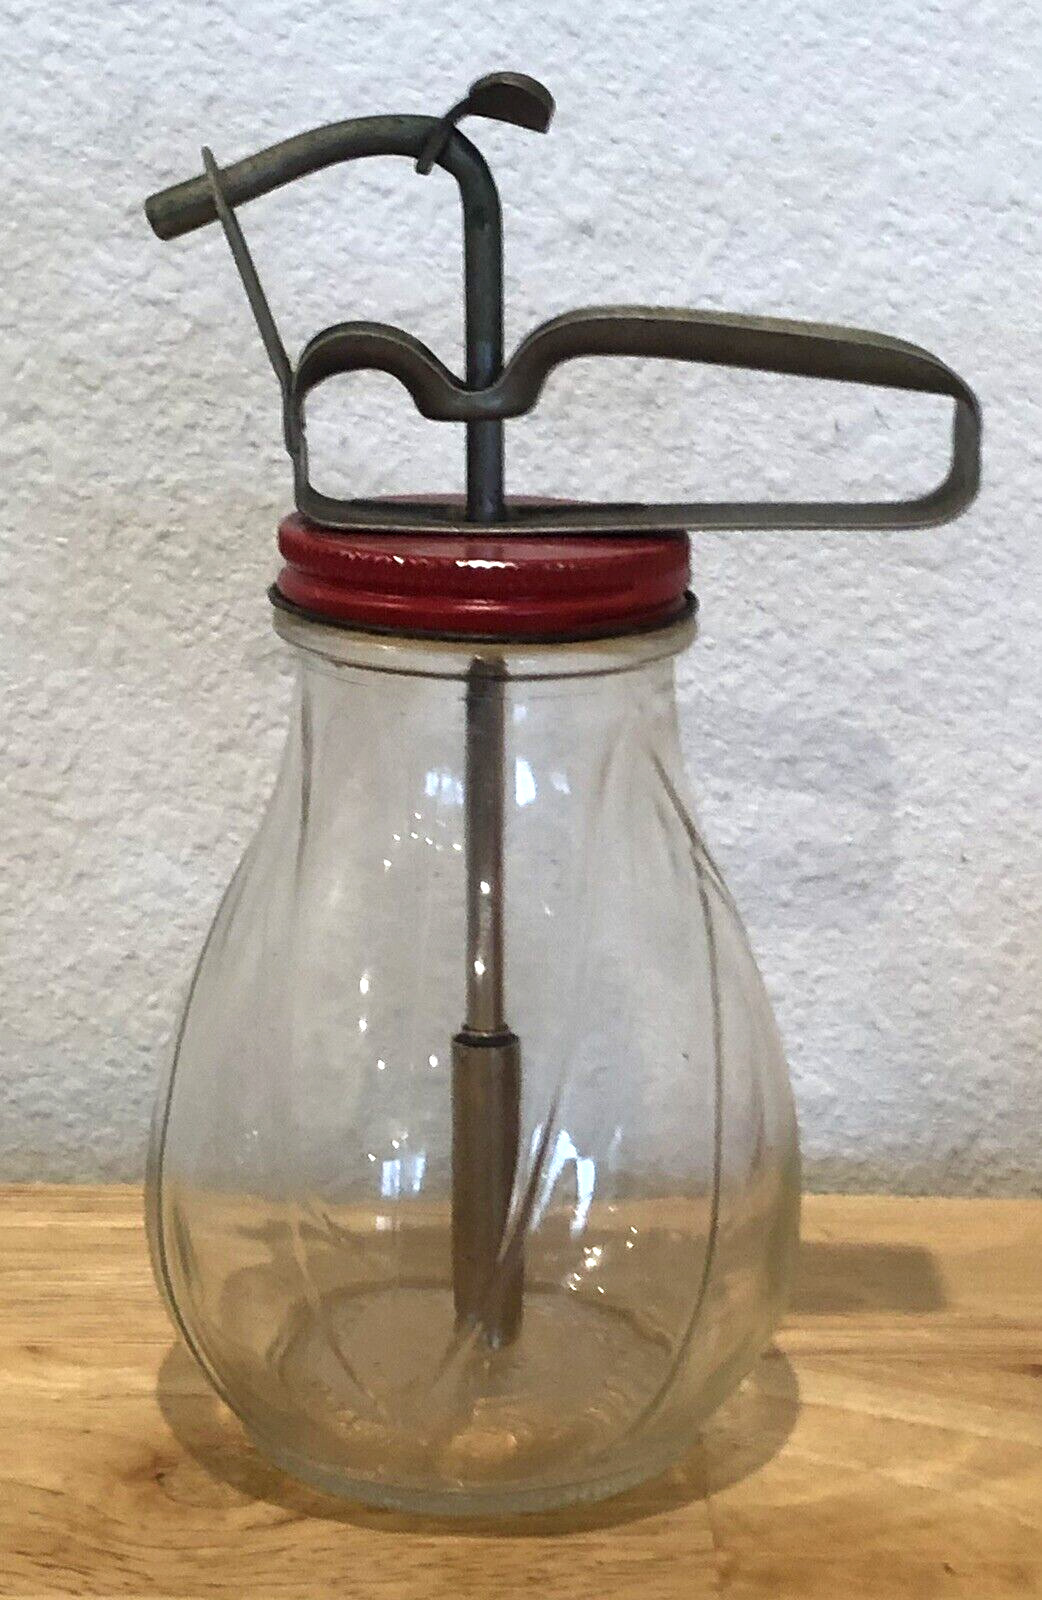 VINTAGE RARE 1940s FEDERAL TOOL CORP GLASS SYRUP DISPENSER WITH METAL PUMP